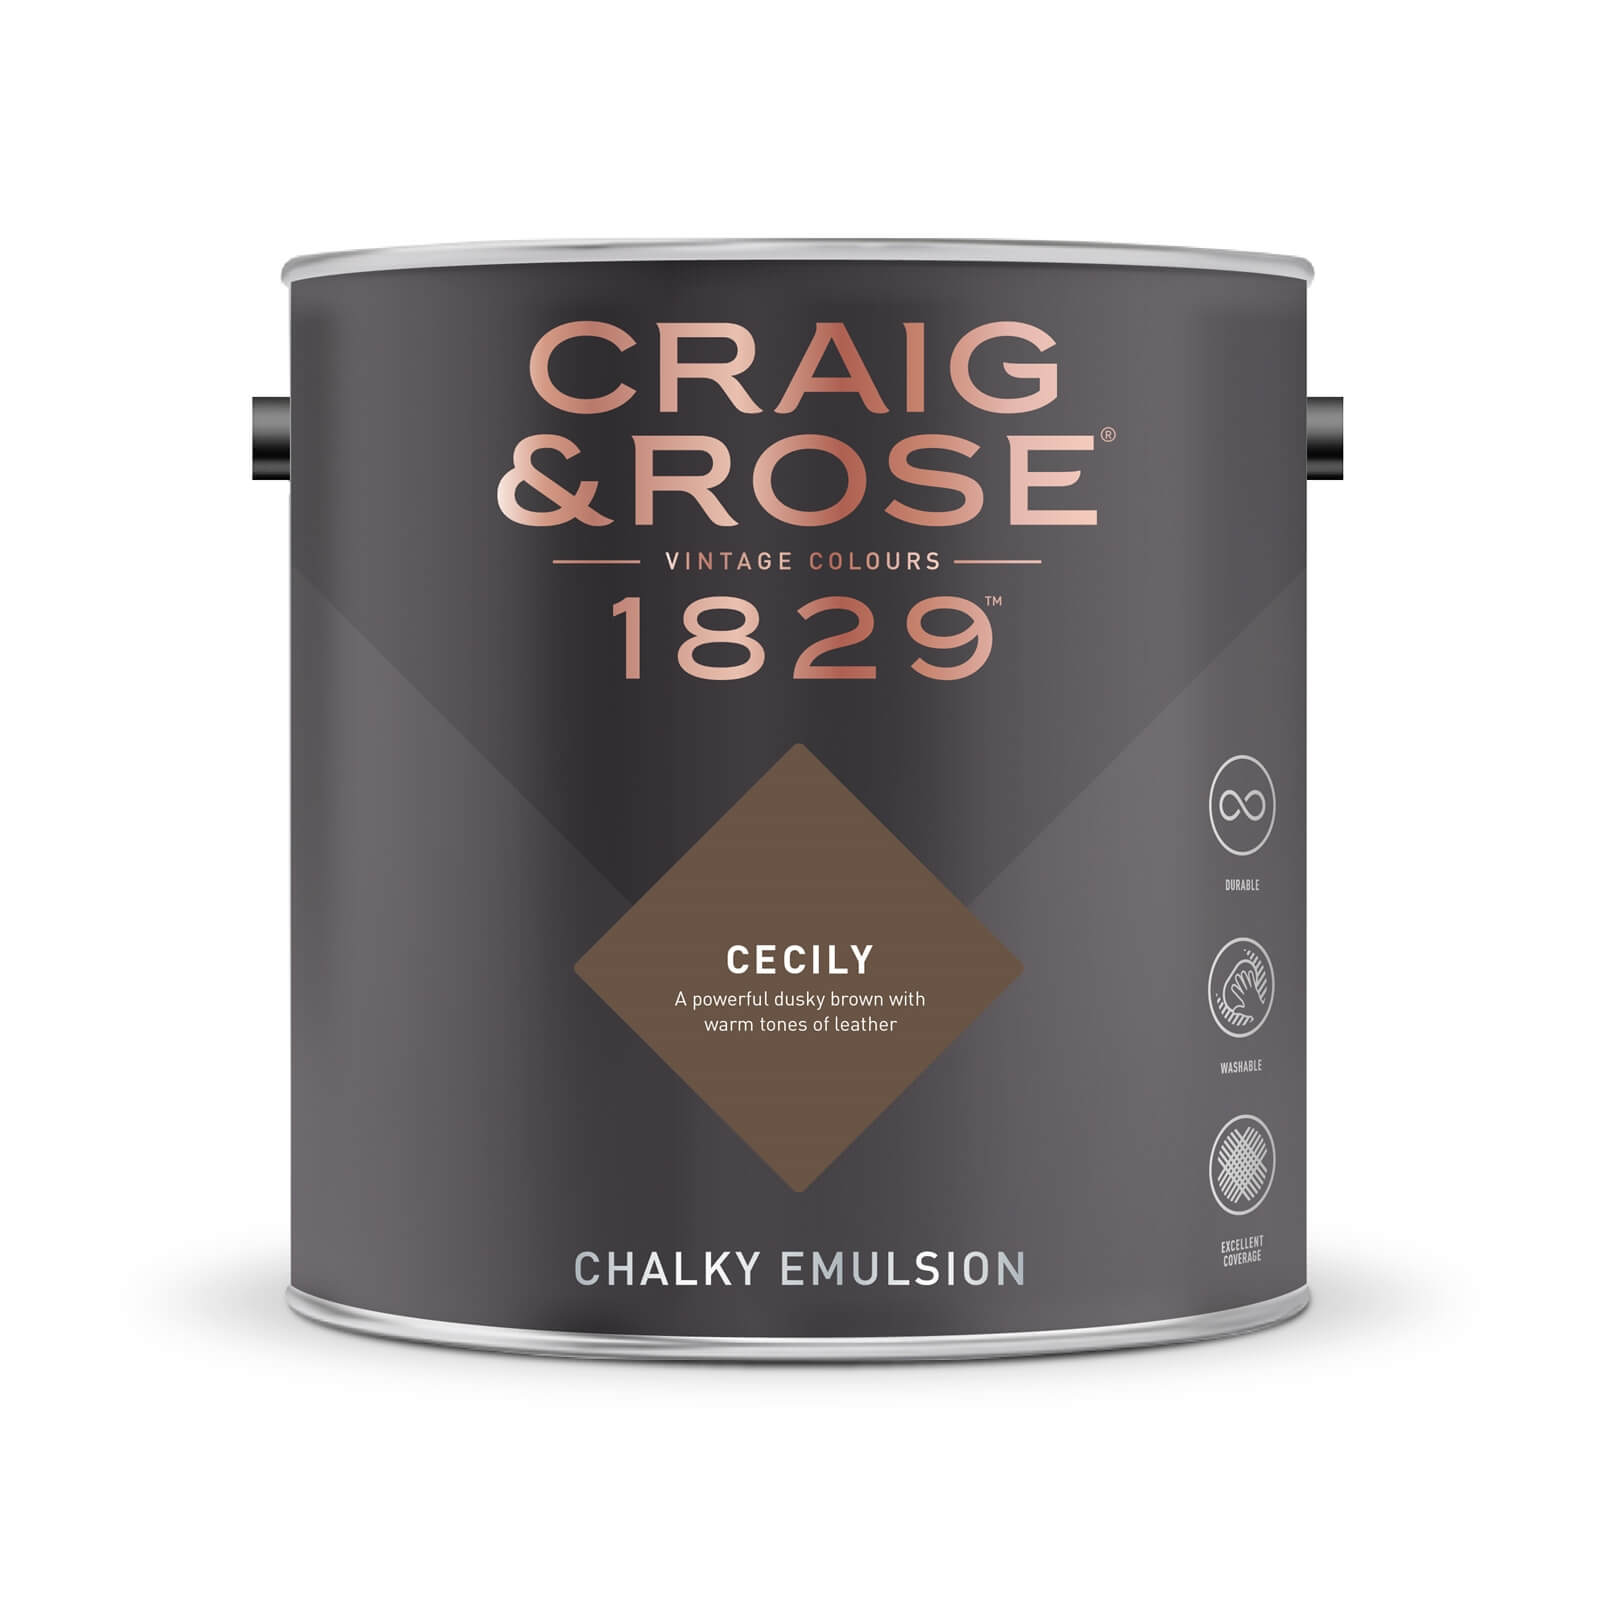 Craig & Rose 1829 Chalky Emulsion Paint Cecily - 5L